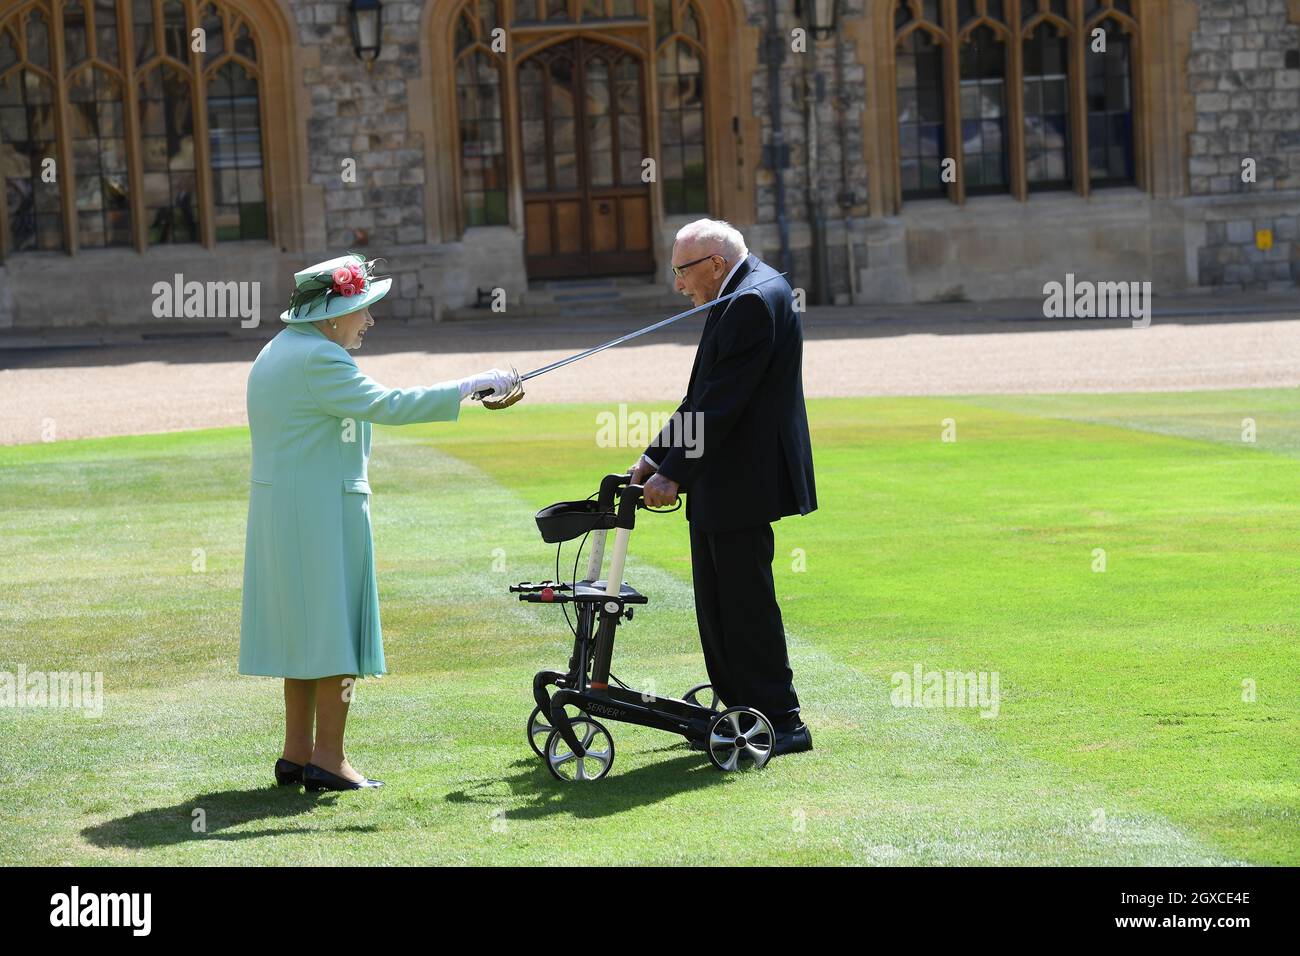 Queen Elizabeth II (using the sword that belonged to her father, King George VI) confers the Honour of Knighthood on 100 year old Captain Sir Thomas Moore before presenting him with the insignia of Knight Bachelor during an investiture ceremony at Windsor Castle on July 17, 2020. Captain Tom Moore raised over £32 million for the NHS during the coronavirus pandemic. Stock Photo